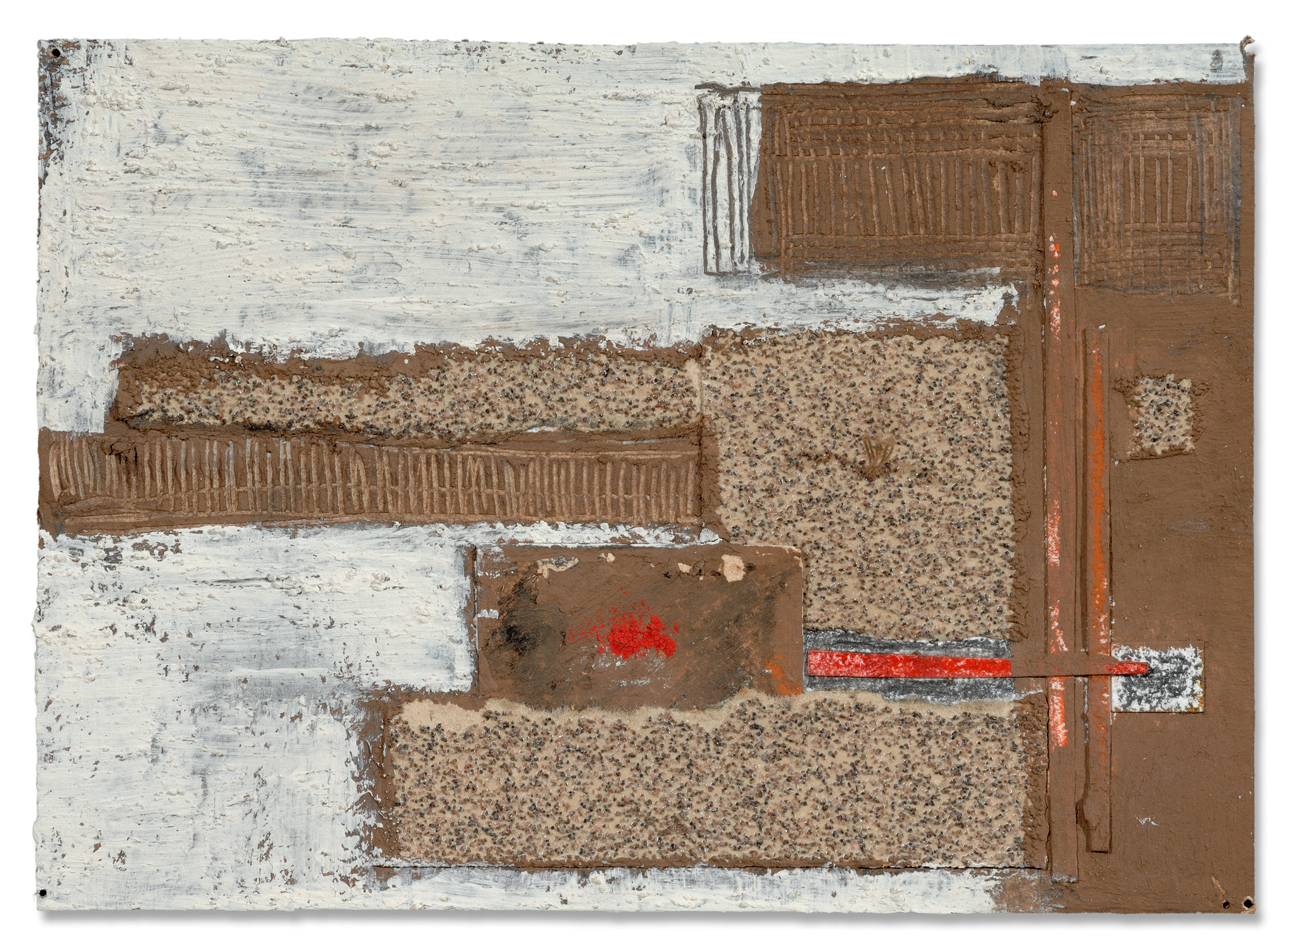 UNTITLED COLLAGE #2, 2013 black clay, porcelain, graphite, sand paper, oil pastel, paper collage on paper, 5 x 7 inches